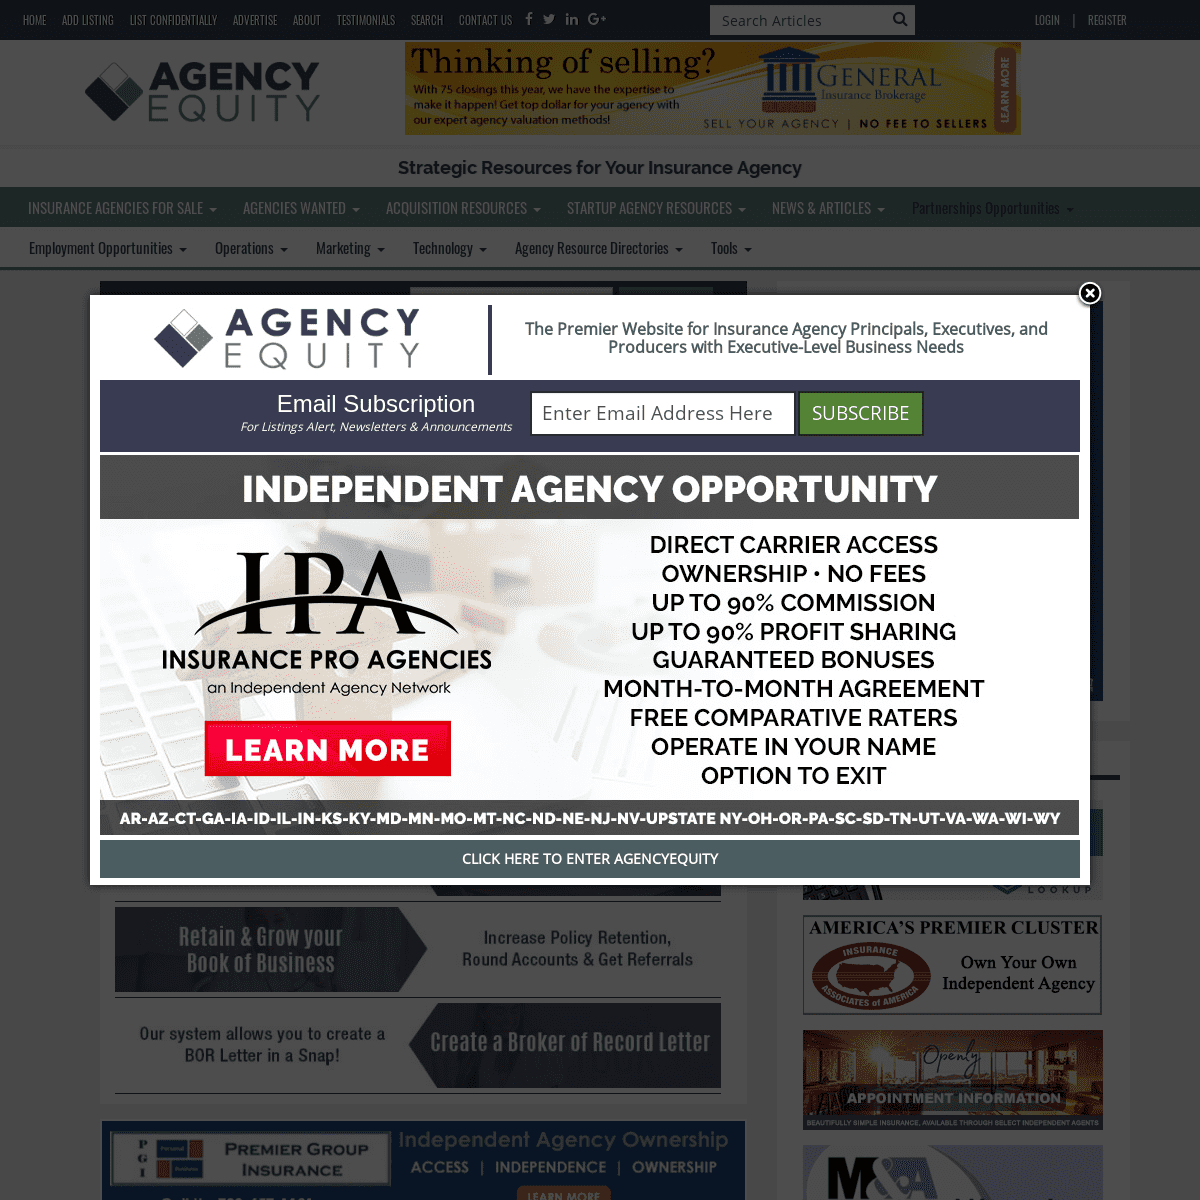 Insurance Agencies for Sale | AgencyEquity.com